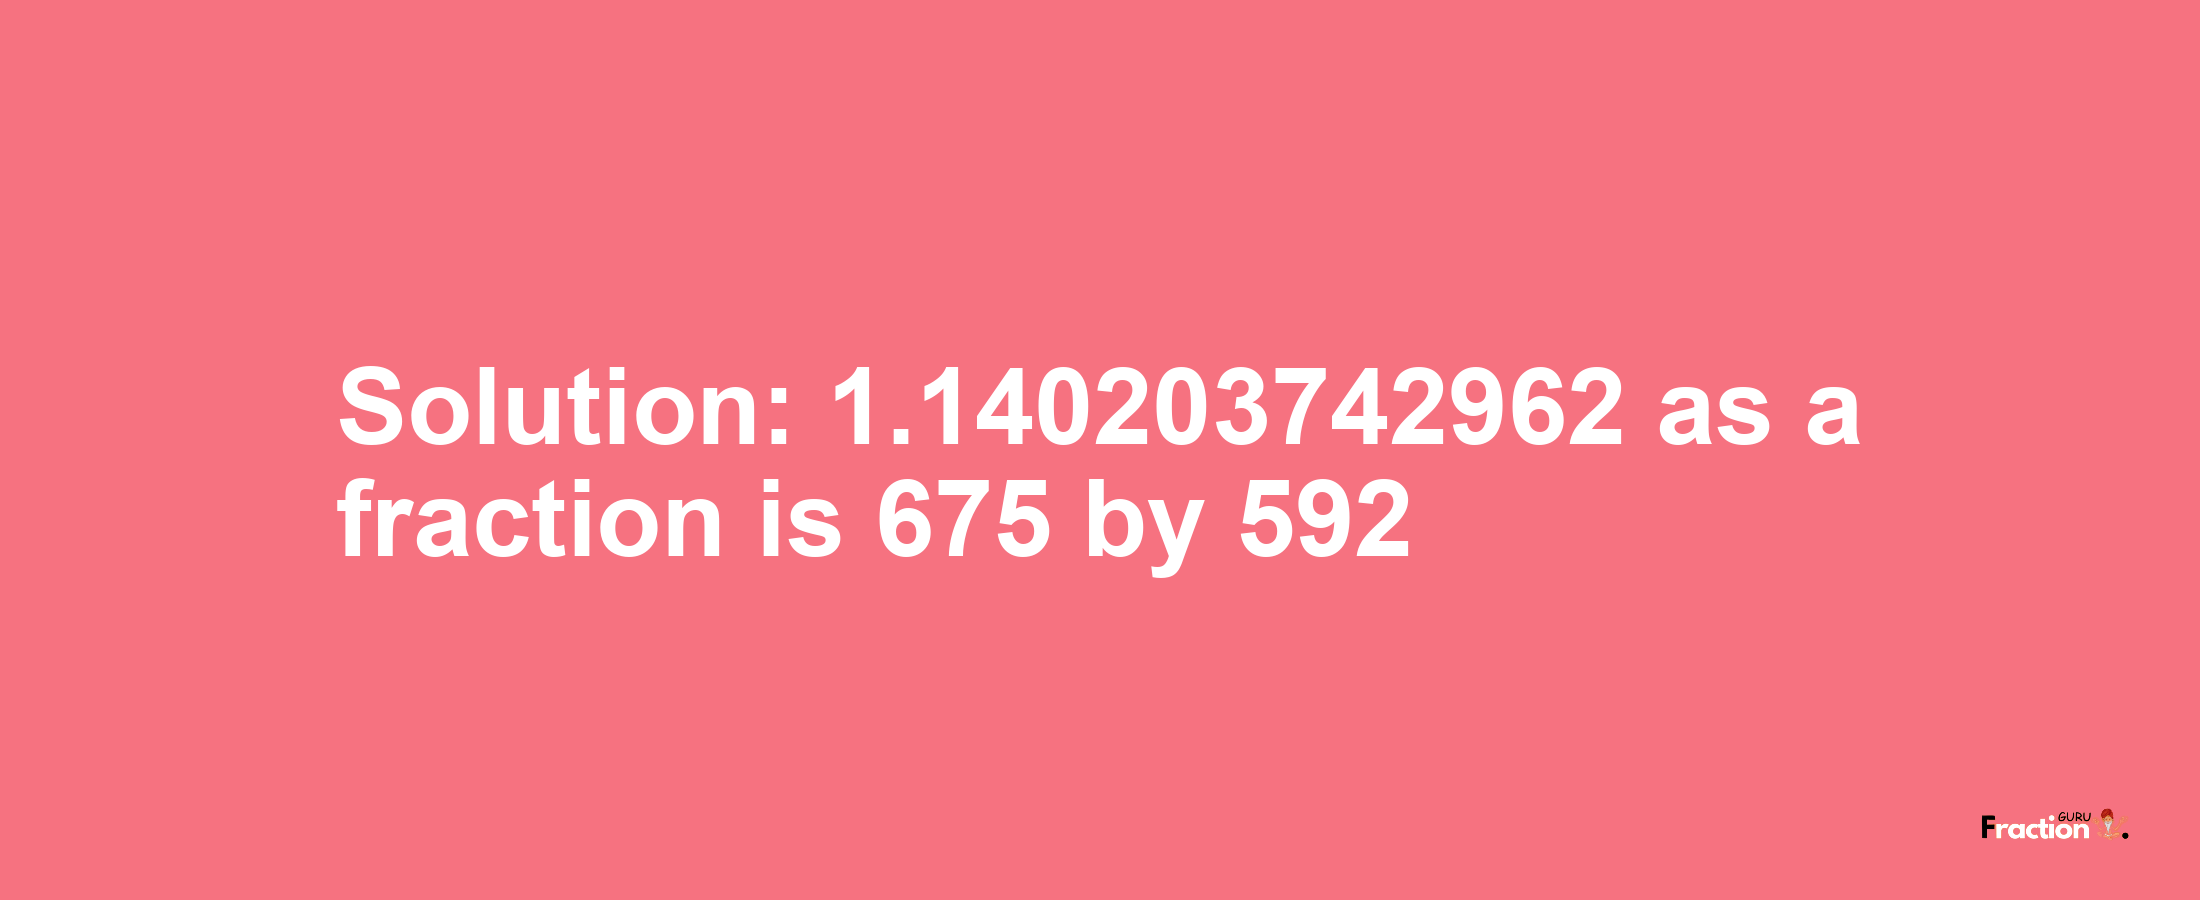 Solution:1.140203742962 as a fraction is 675/592